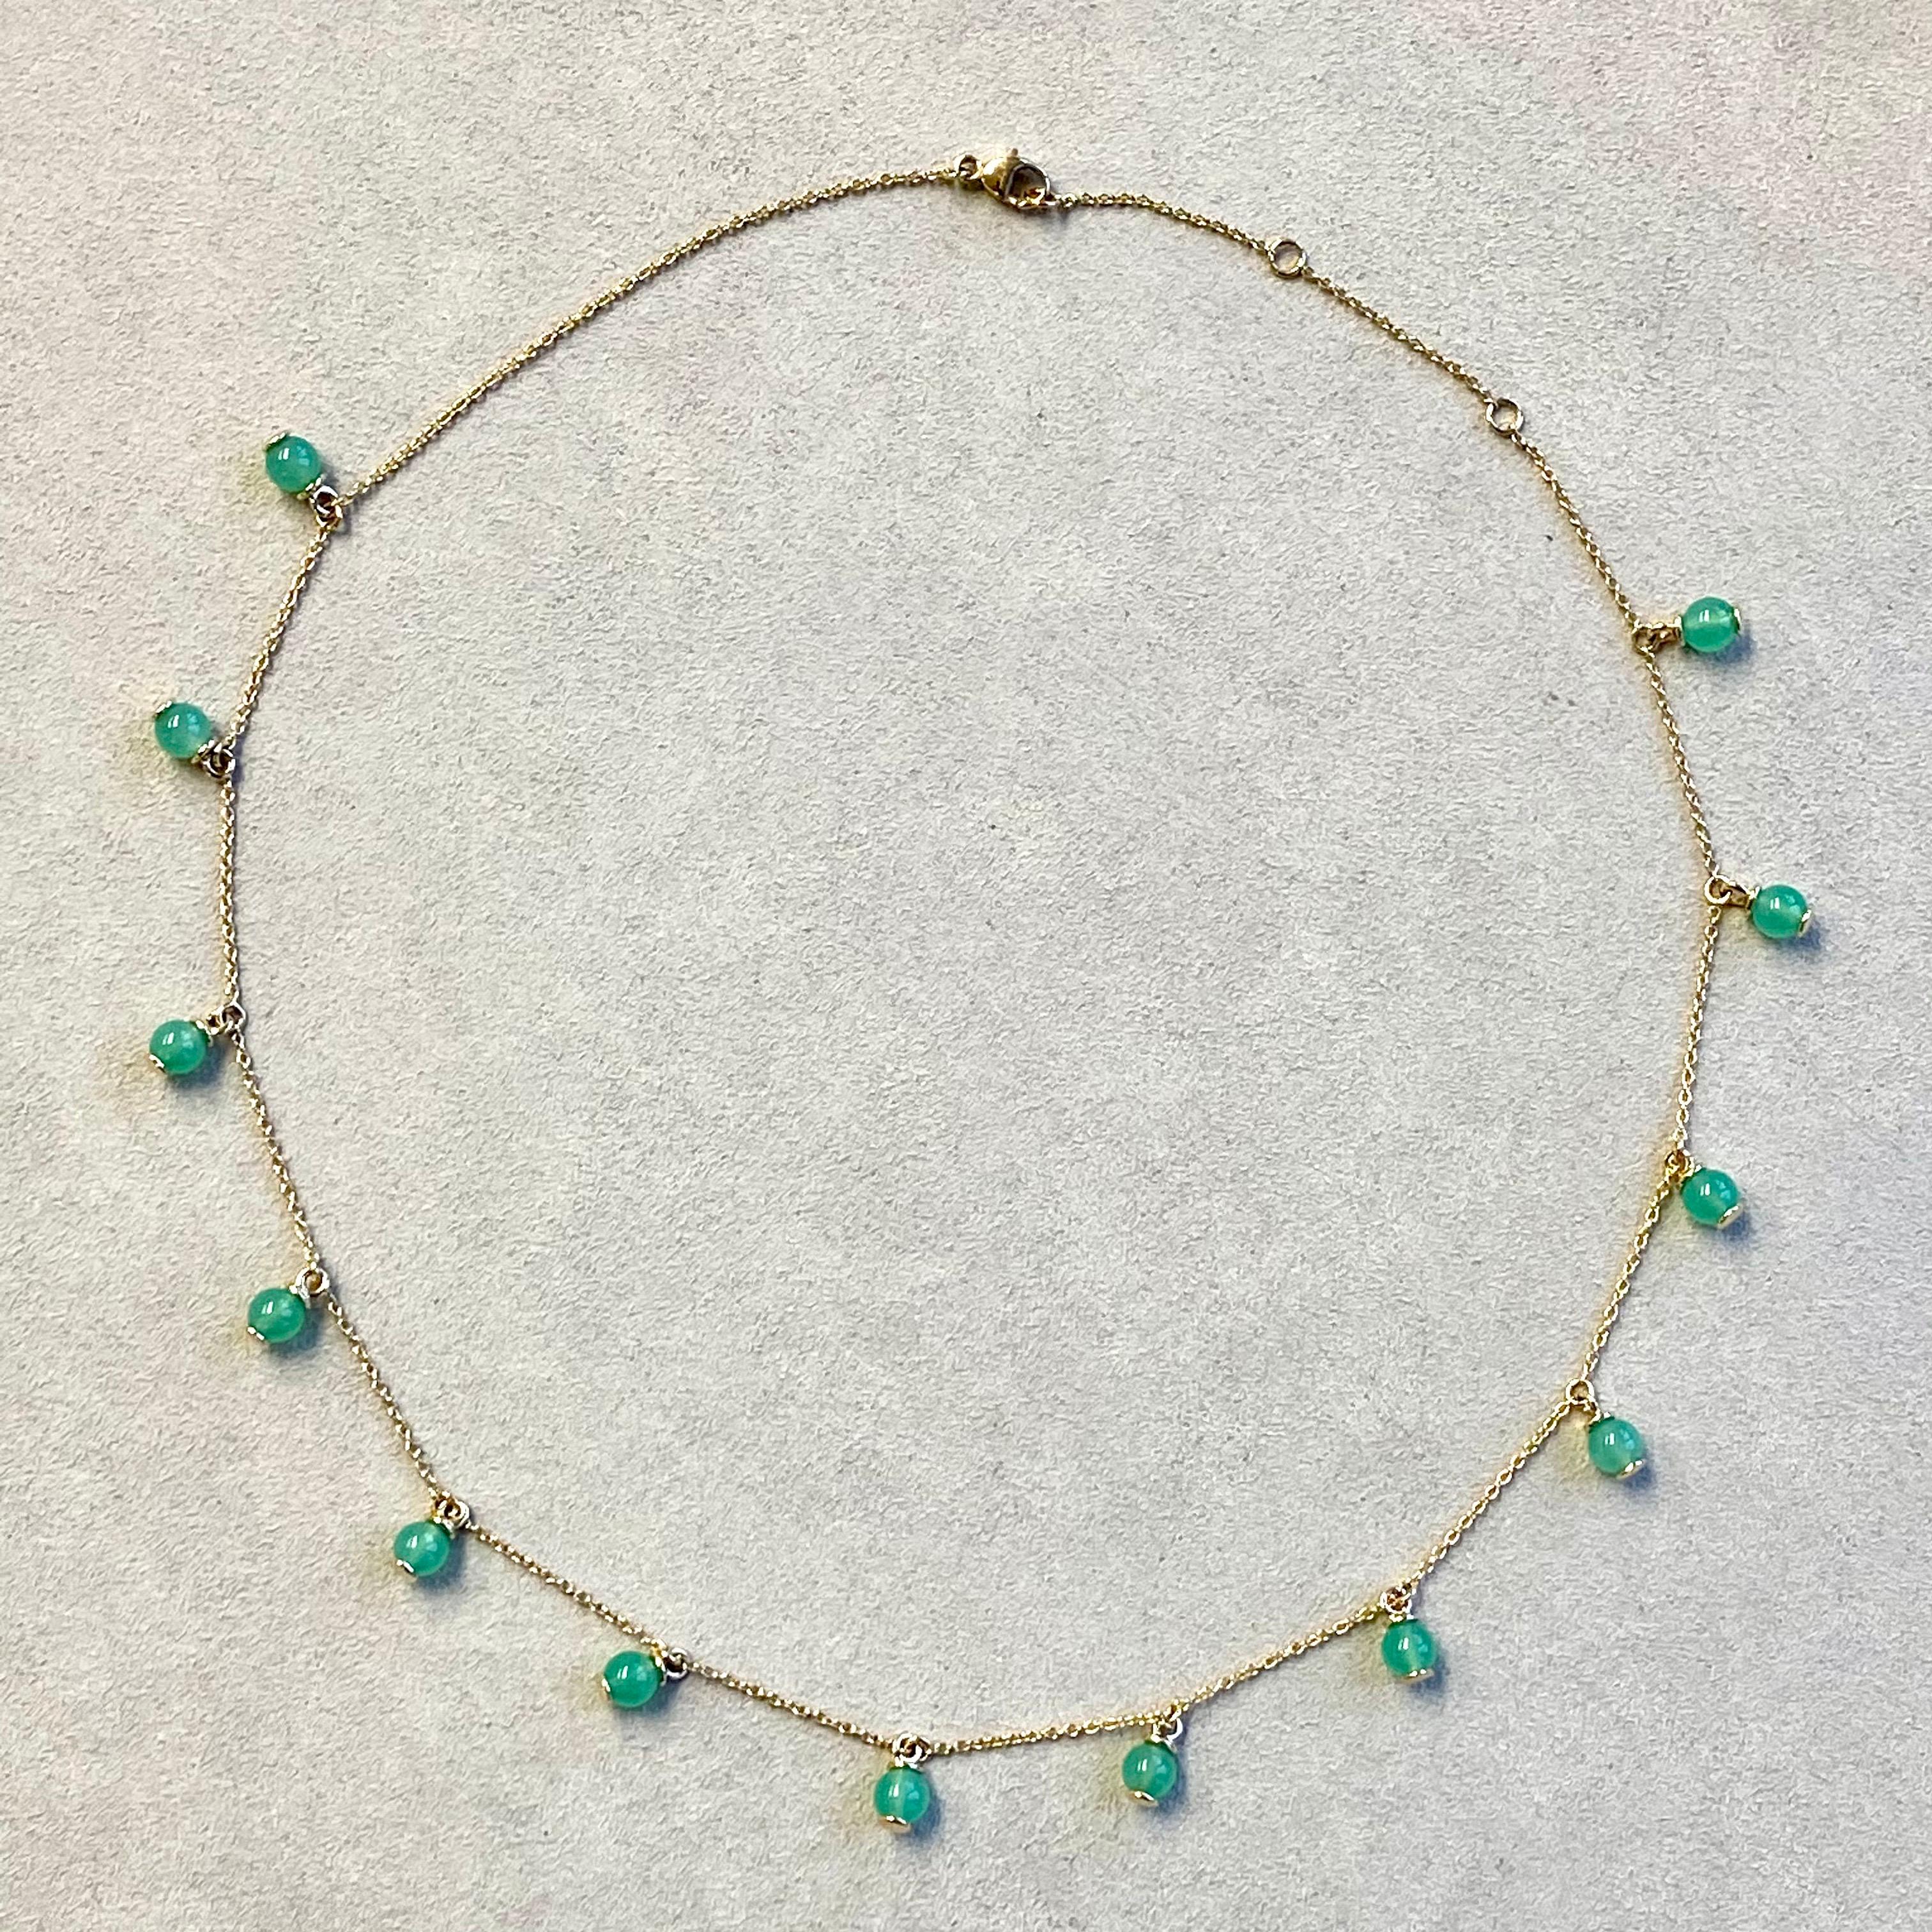 Created in 18 karat yellow gold
18 inch length
Chrysoprase beads 11 carats approx.
18kyg lobster clasp
Limited edition

Ensconced in 18 karat yellow gold, this limited edition necklace boasts an 18 inch chain and boasts 11 carats of chrysoprase